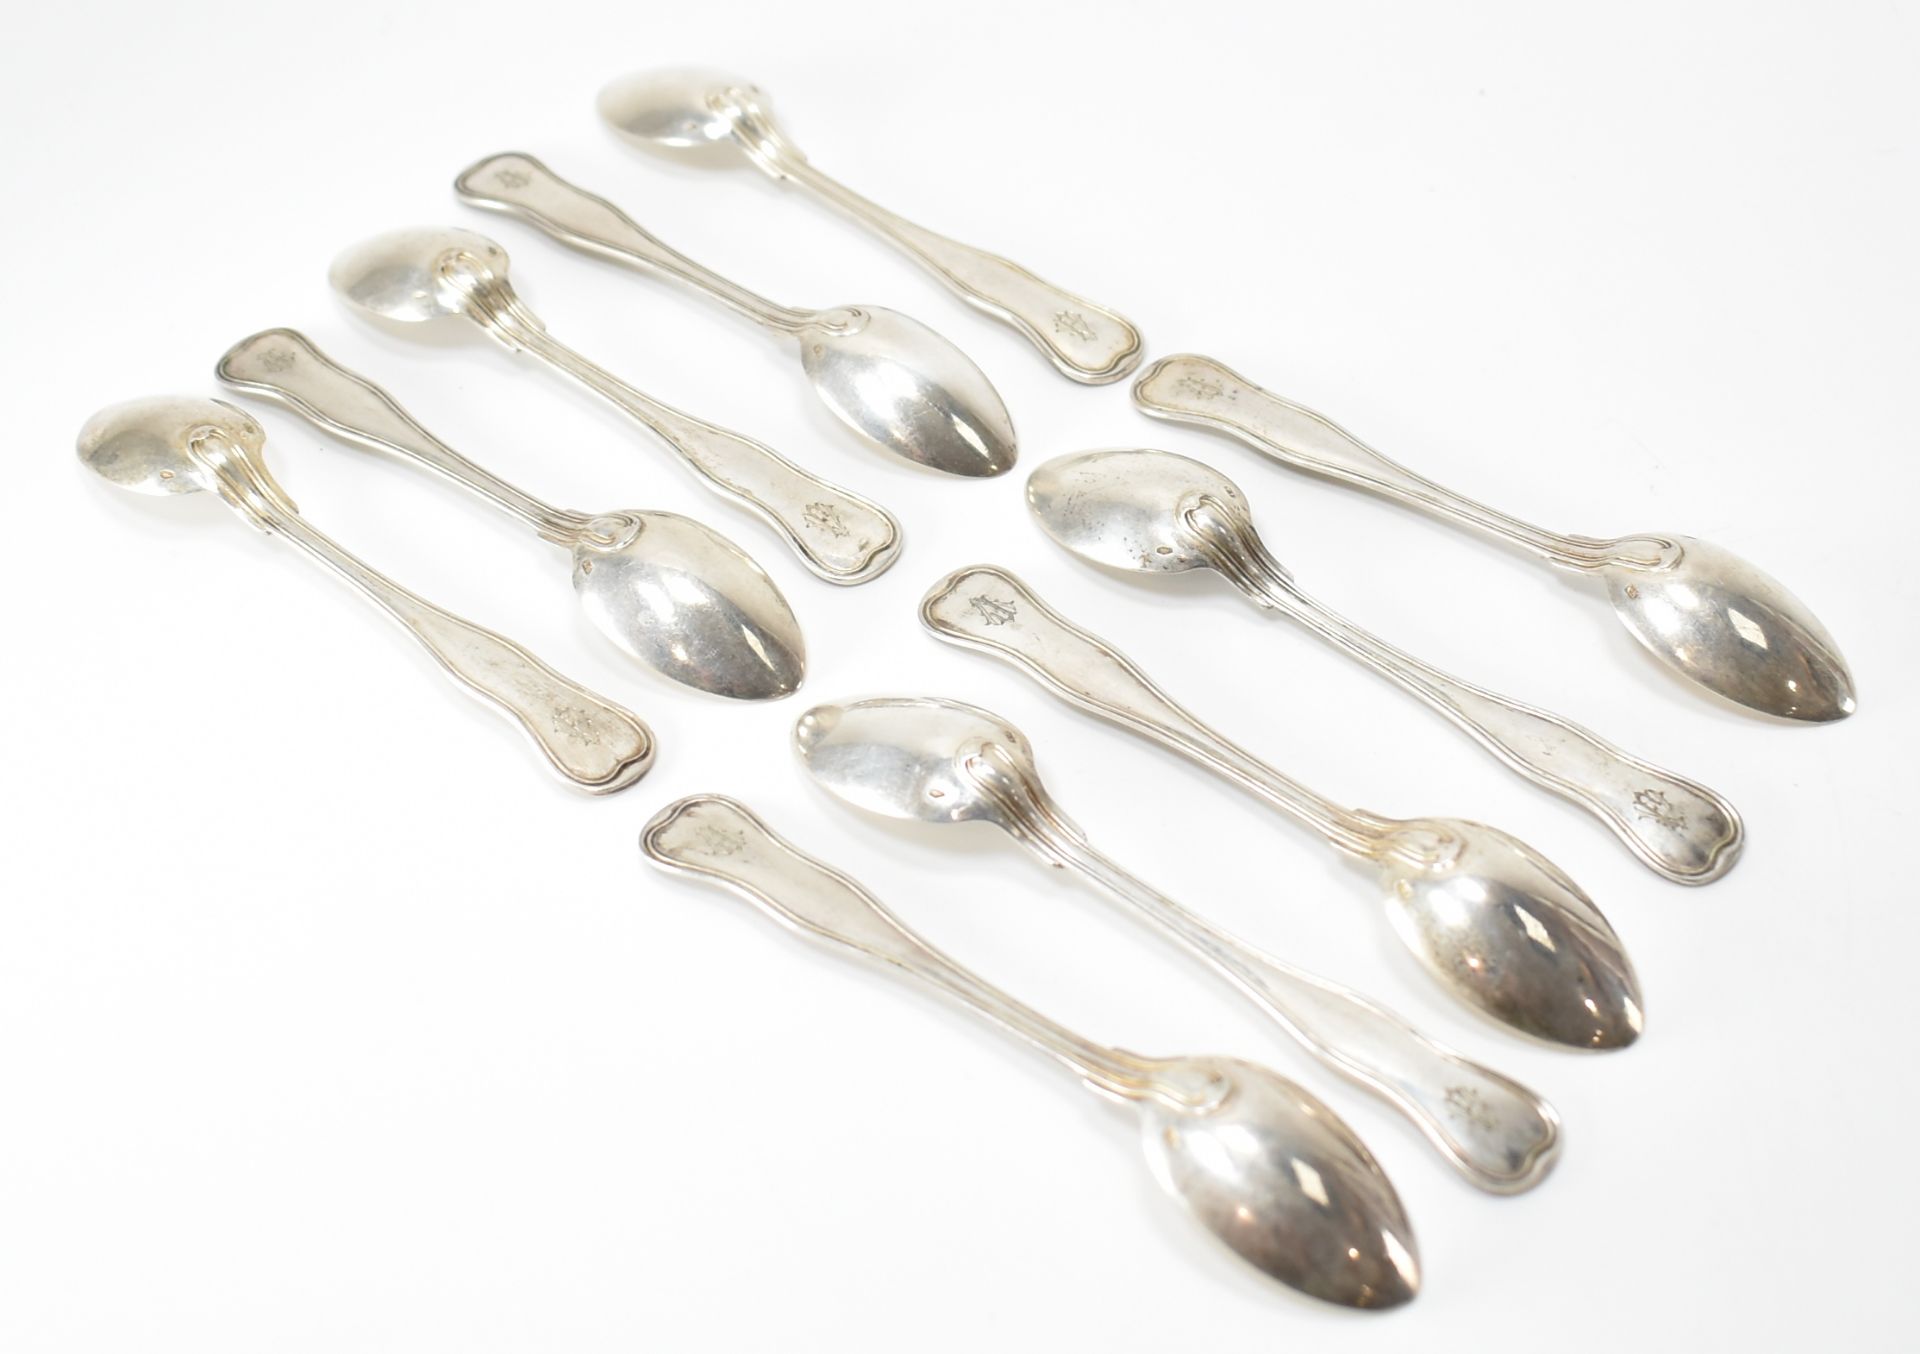 SET OF 10 ANTIQUE AUSTRO HUNGARIAN SILVER TEASPOONS - Image 4 of 6